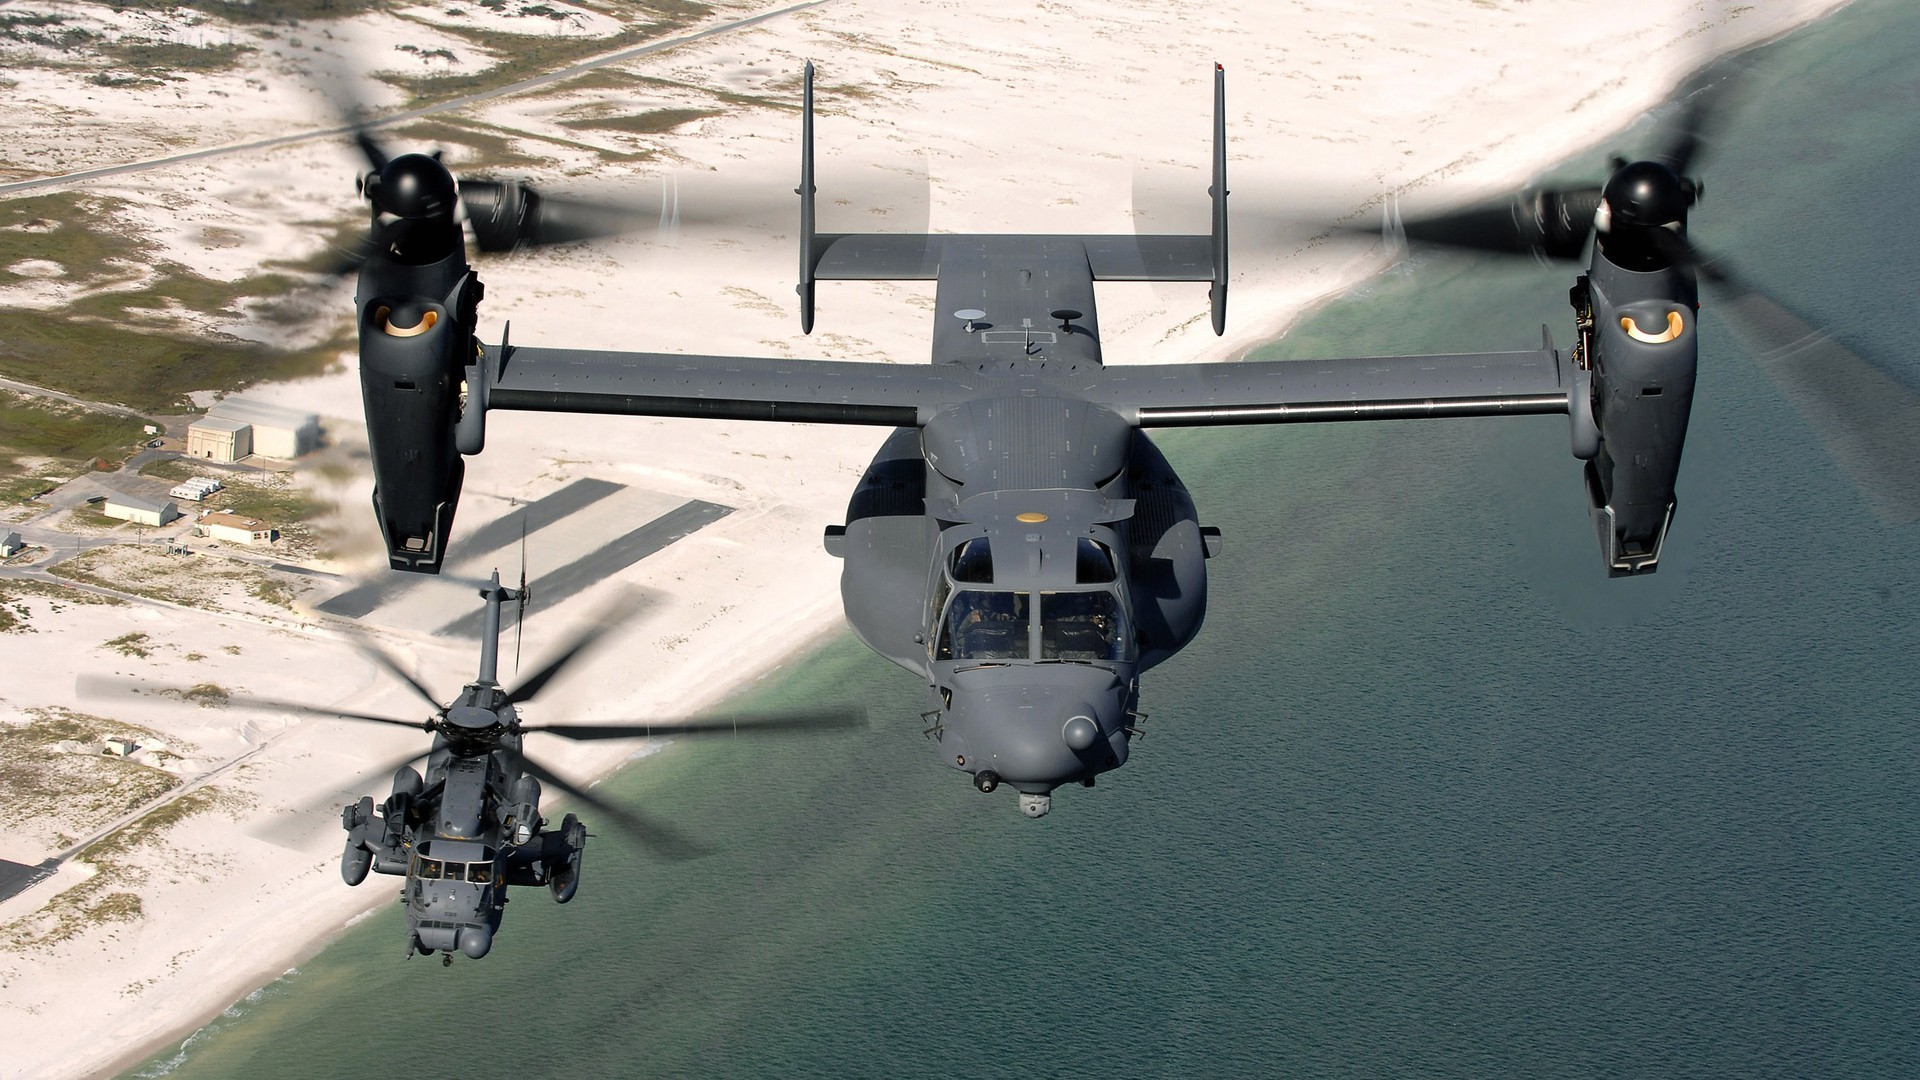 machine gun  helicopters  v 22 osprey  military wallpapers hd    desktop and mobile backgrounds